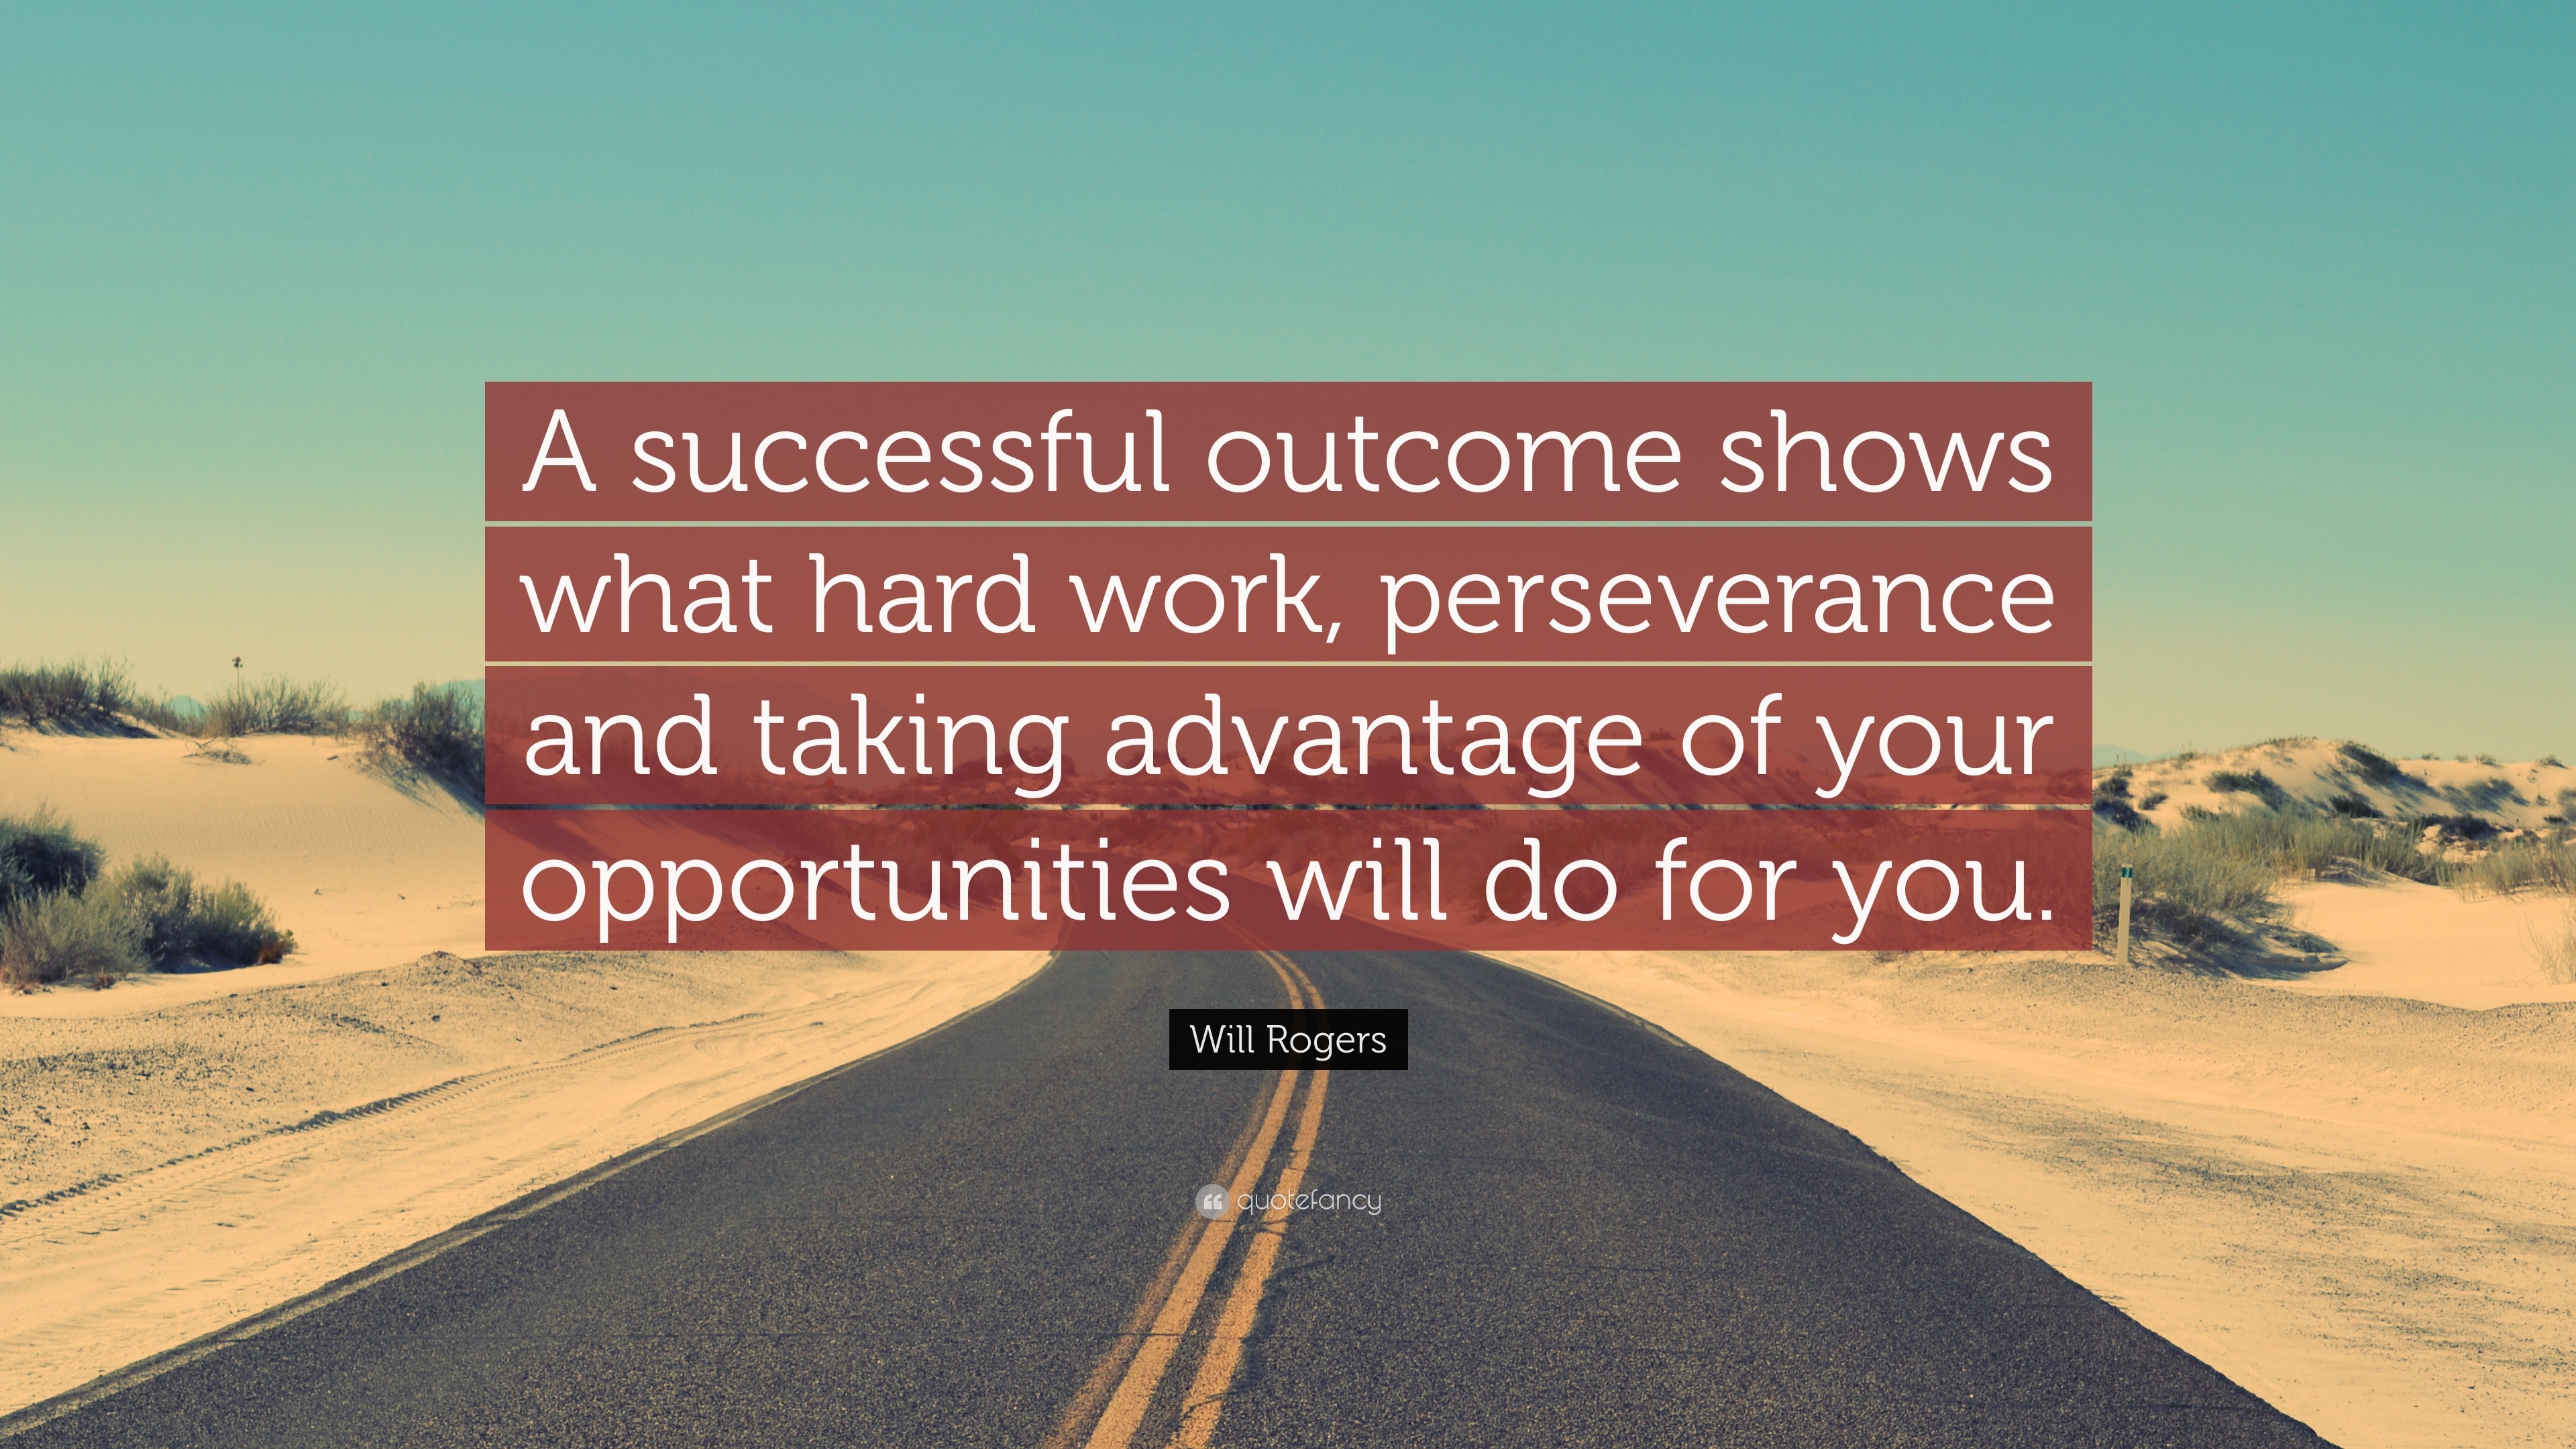 Will Rogers Quote “a Successful Outcome Shows What Hard Work